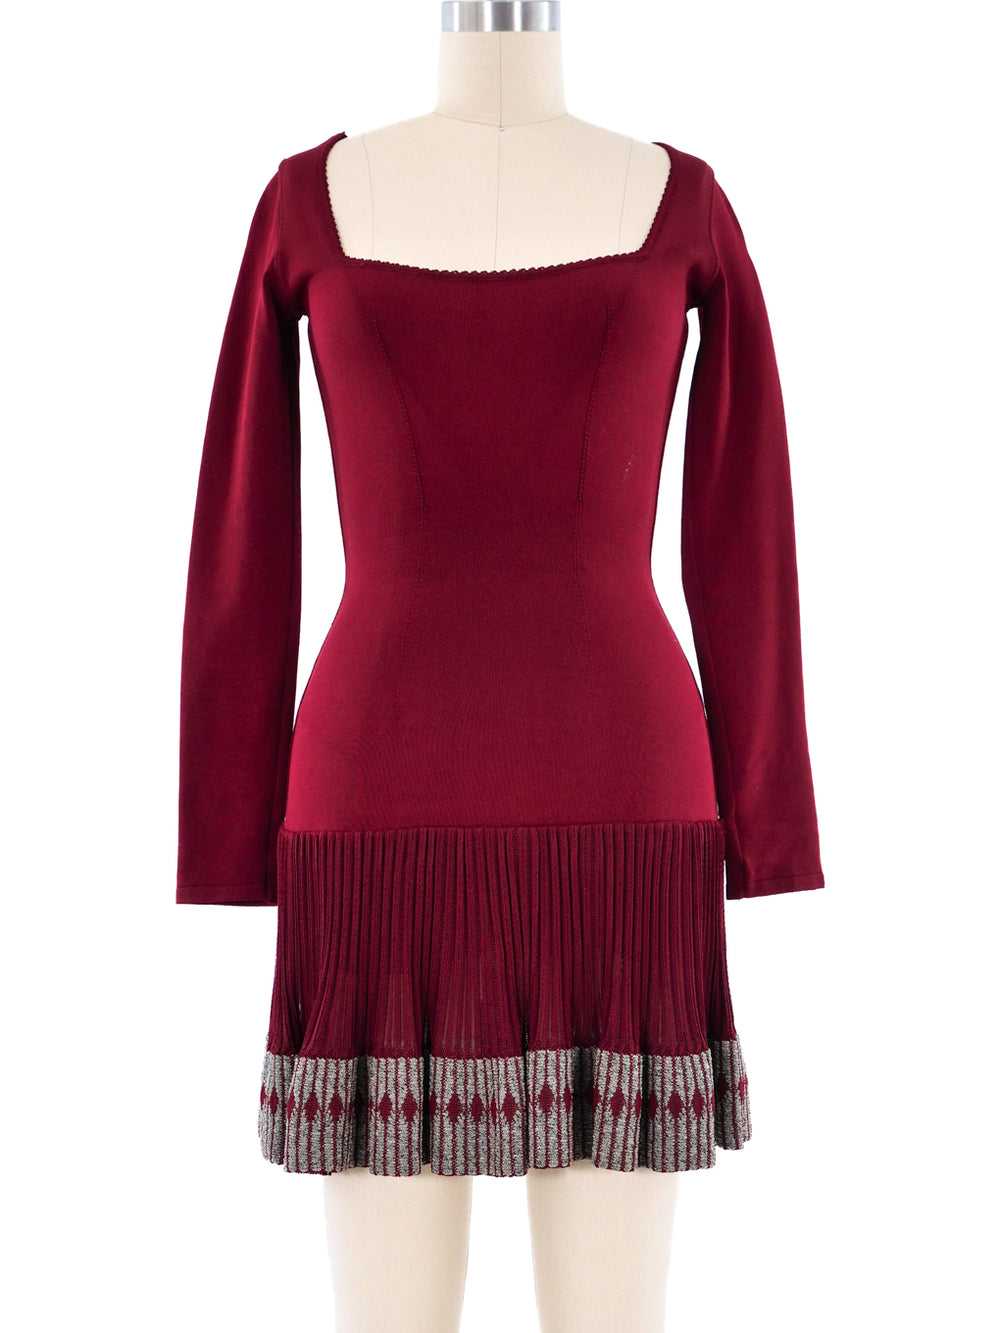 Alaia Cranberry Fit and Flare Ruffle Dress - image 1